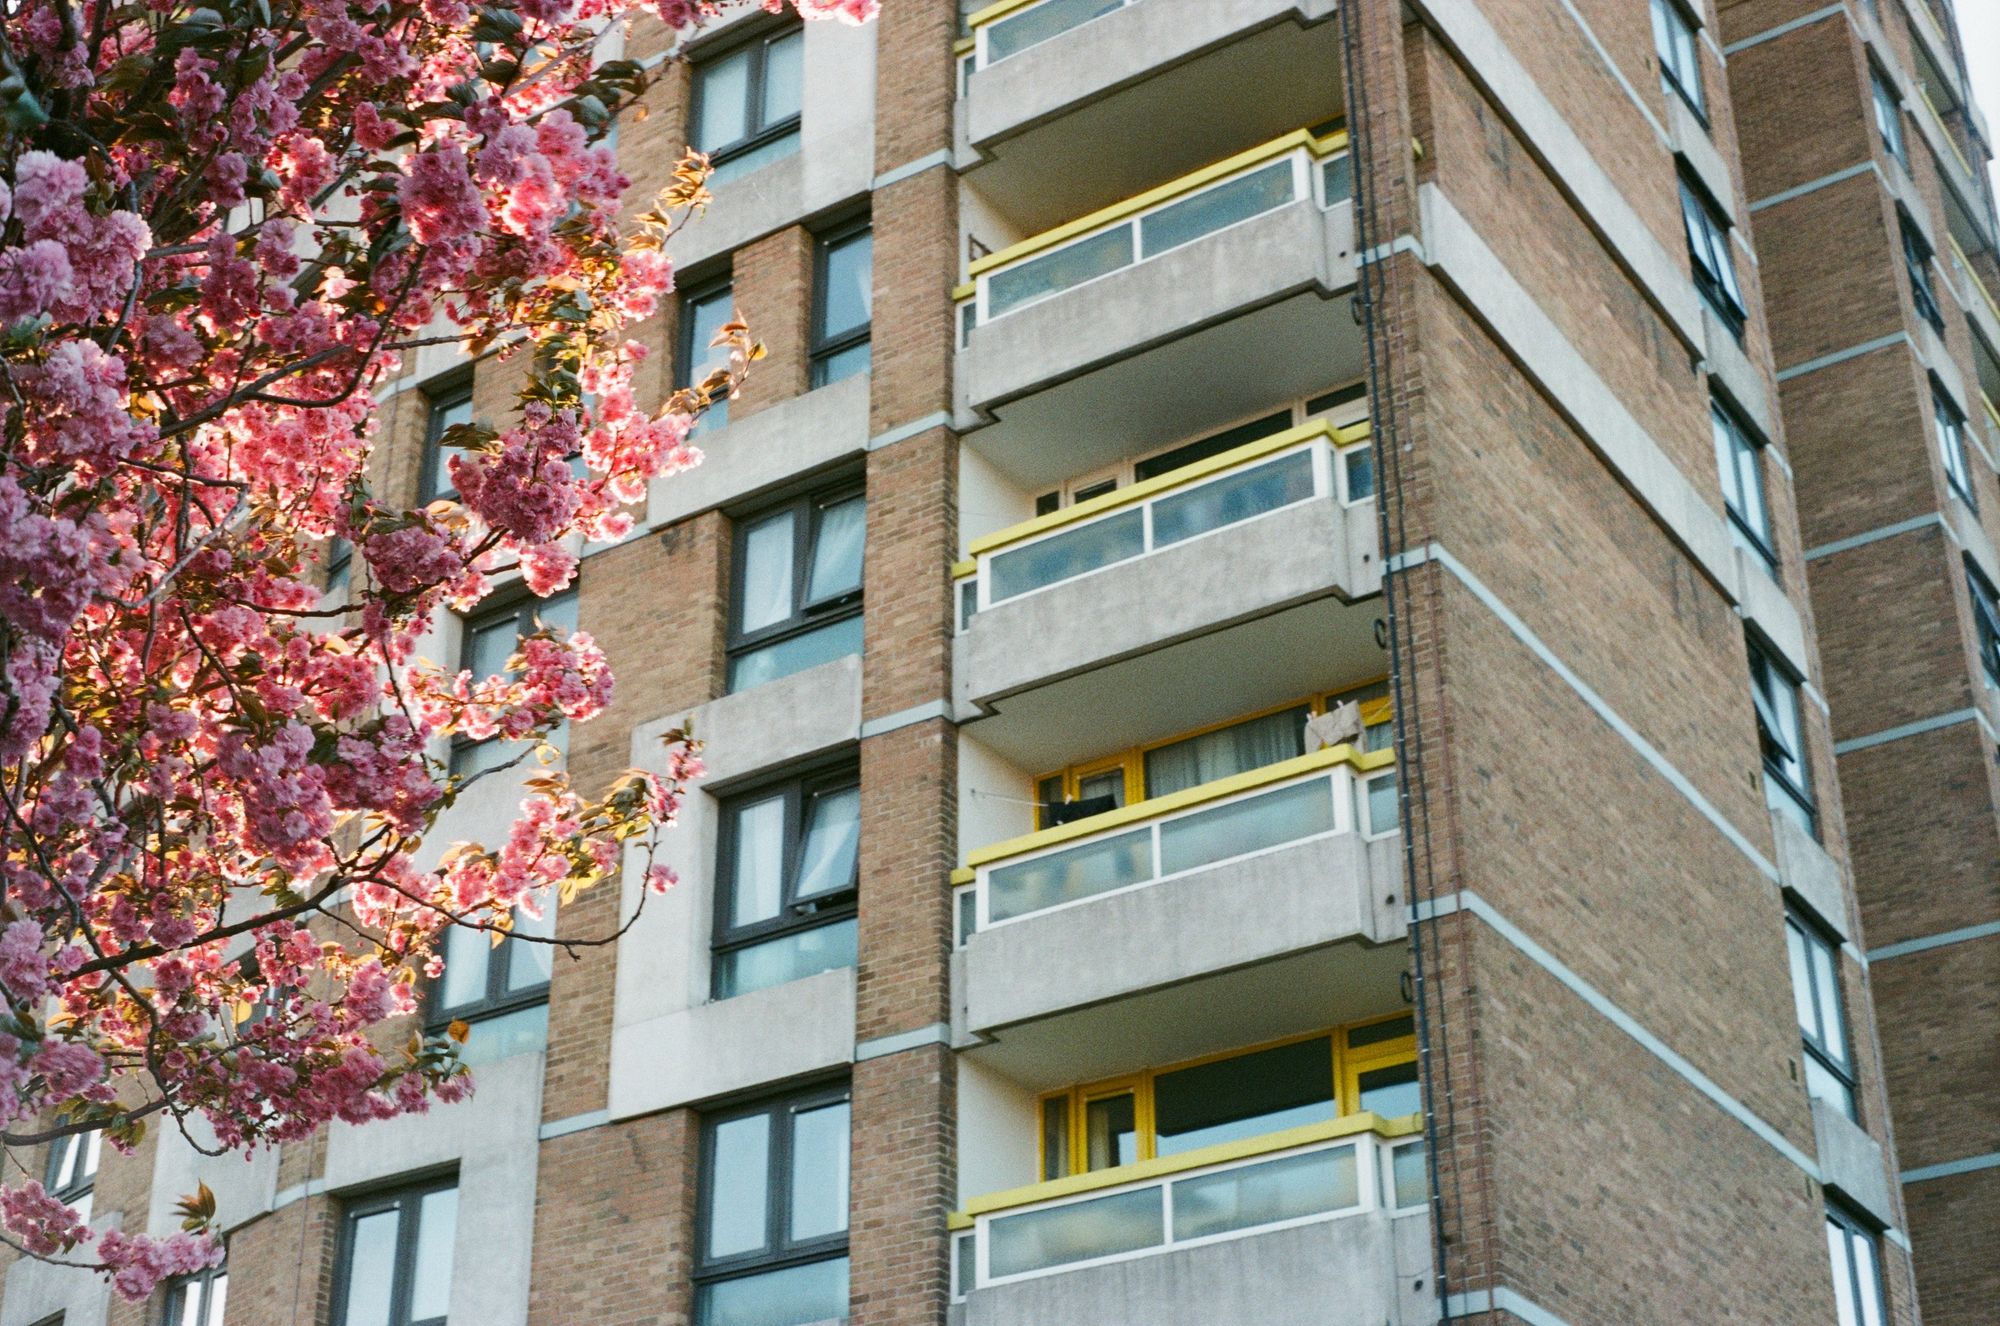 A brick tower block with concrete balconies with yellow balustrades and window frames. A pink tree is in blossom in the foreground, glowing with backlight from an evening sun.